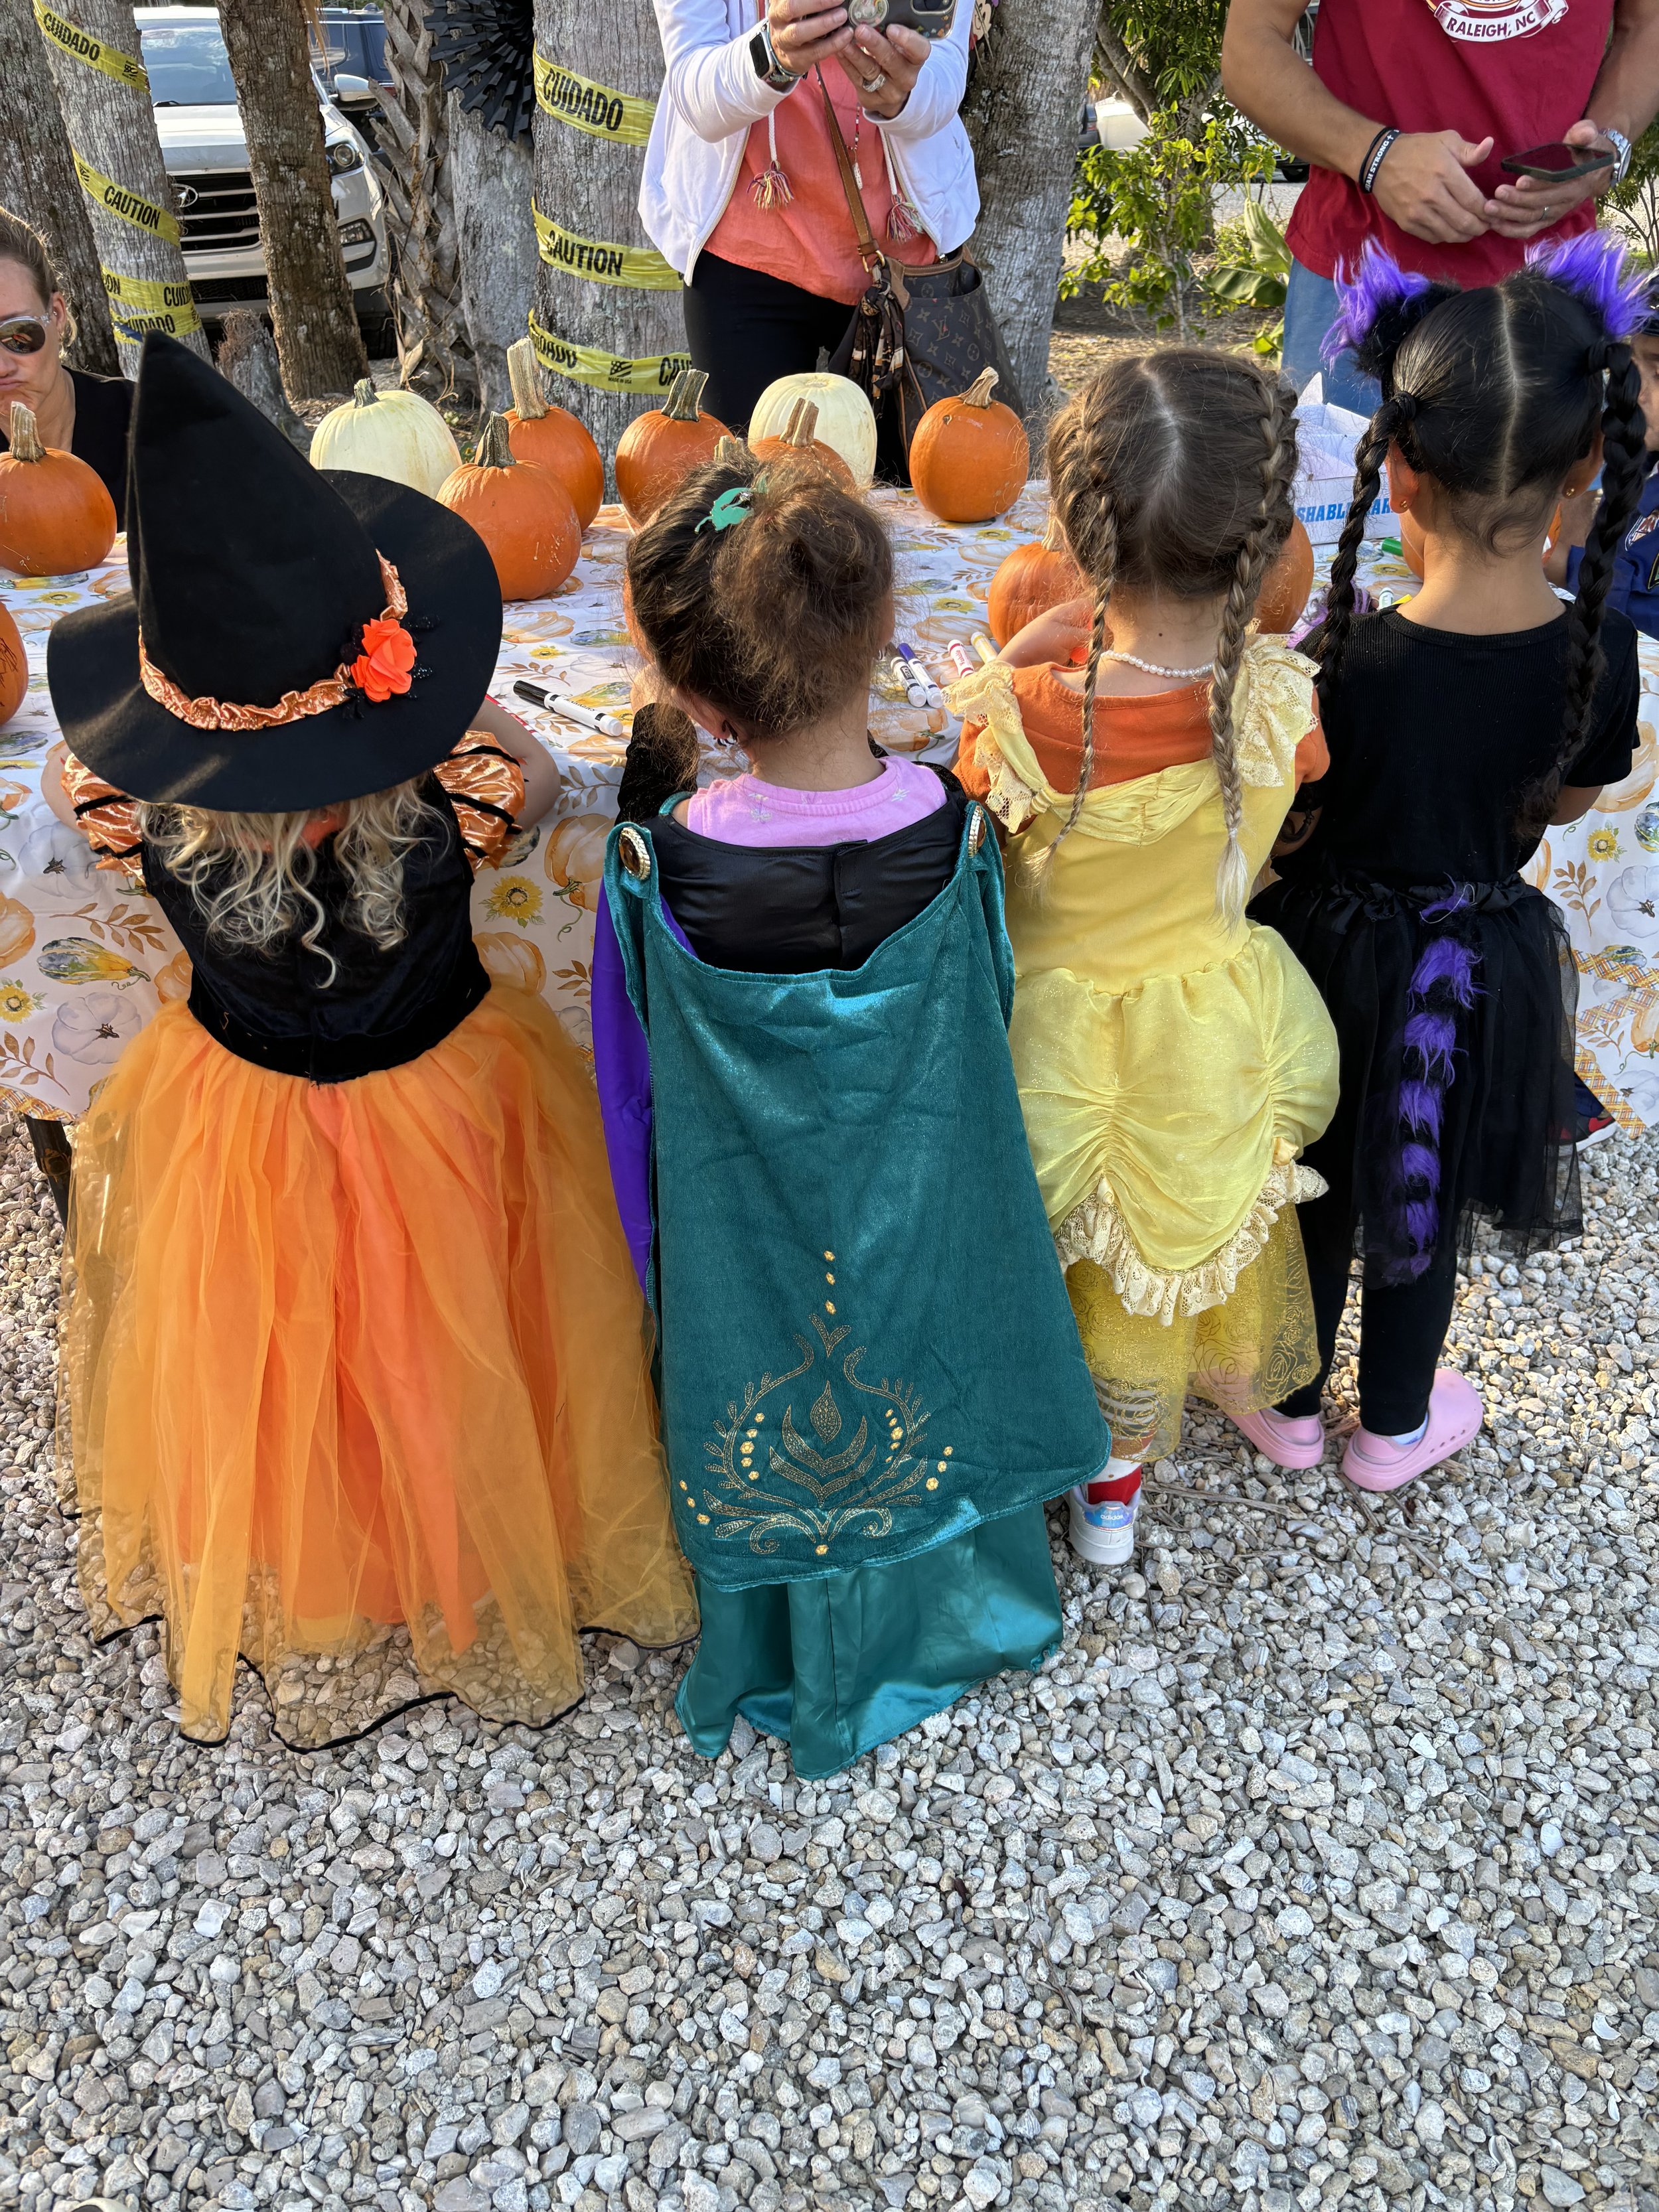 Students look forward to Halloween festivities and costumes at